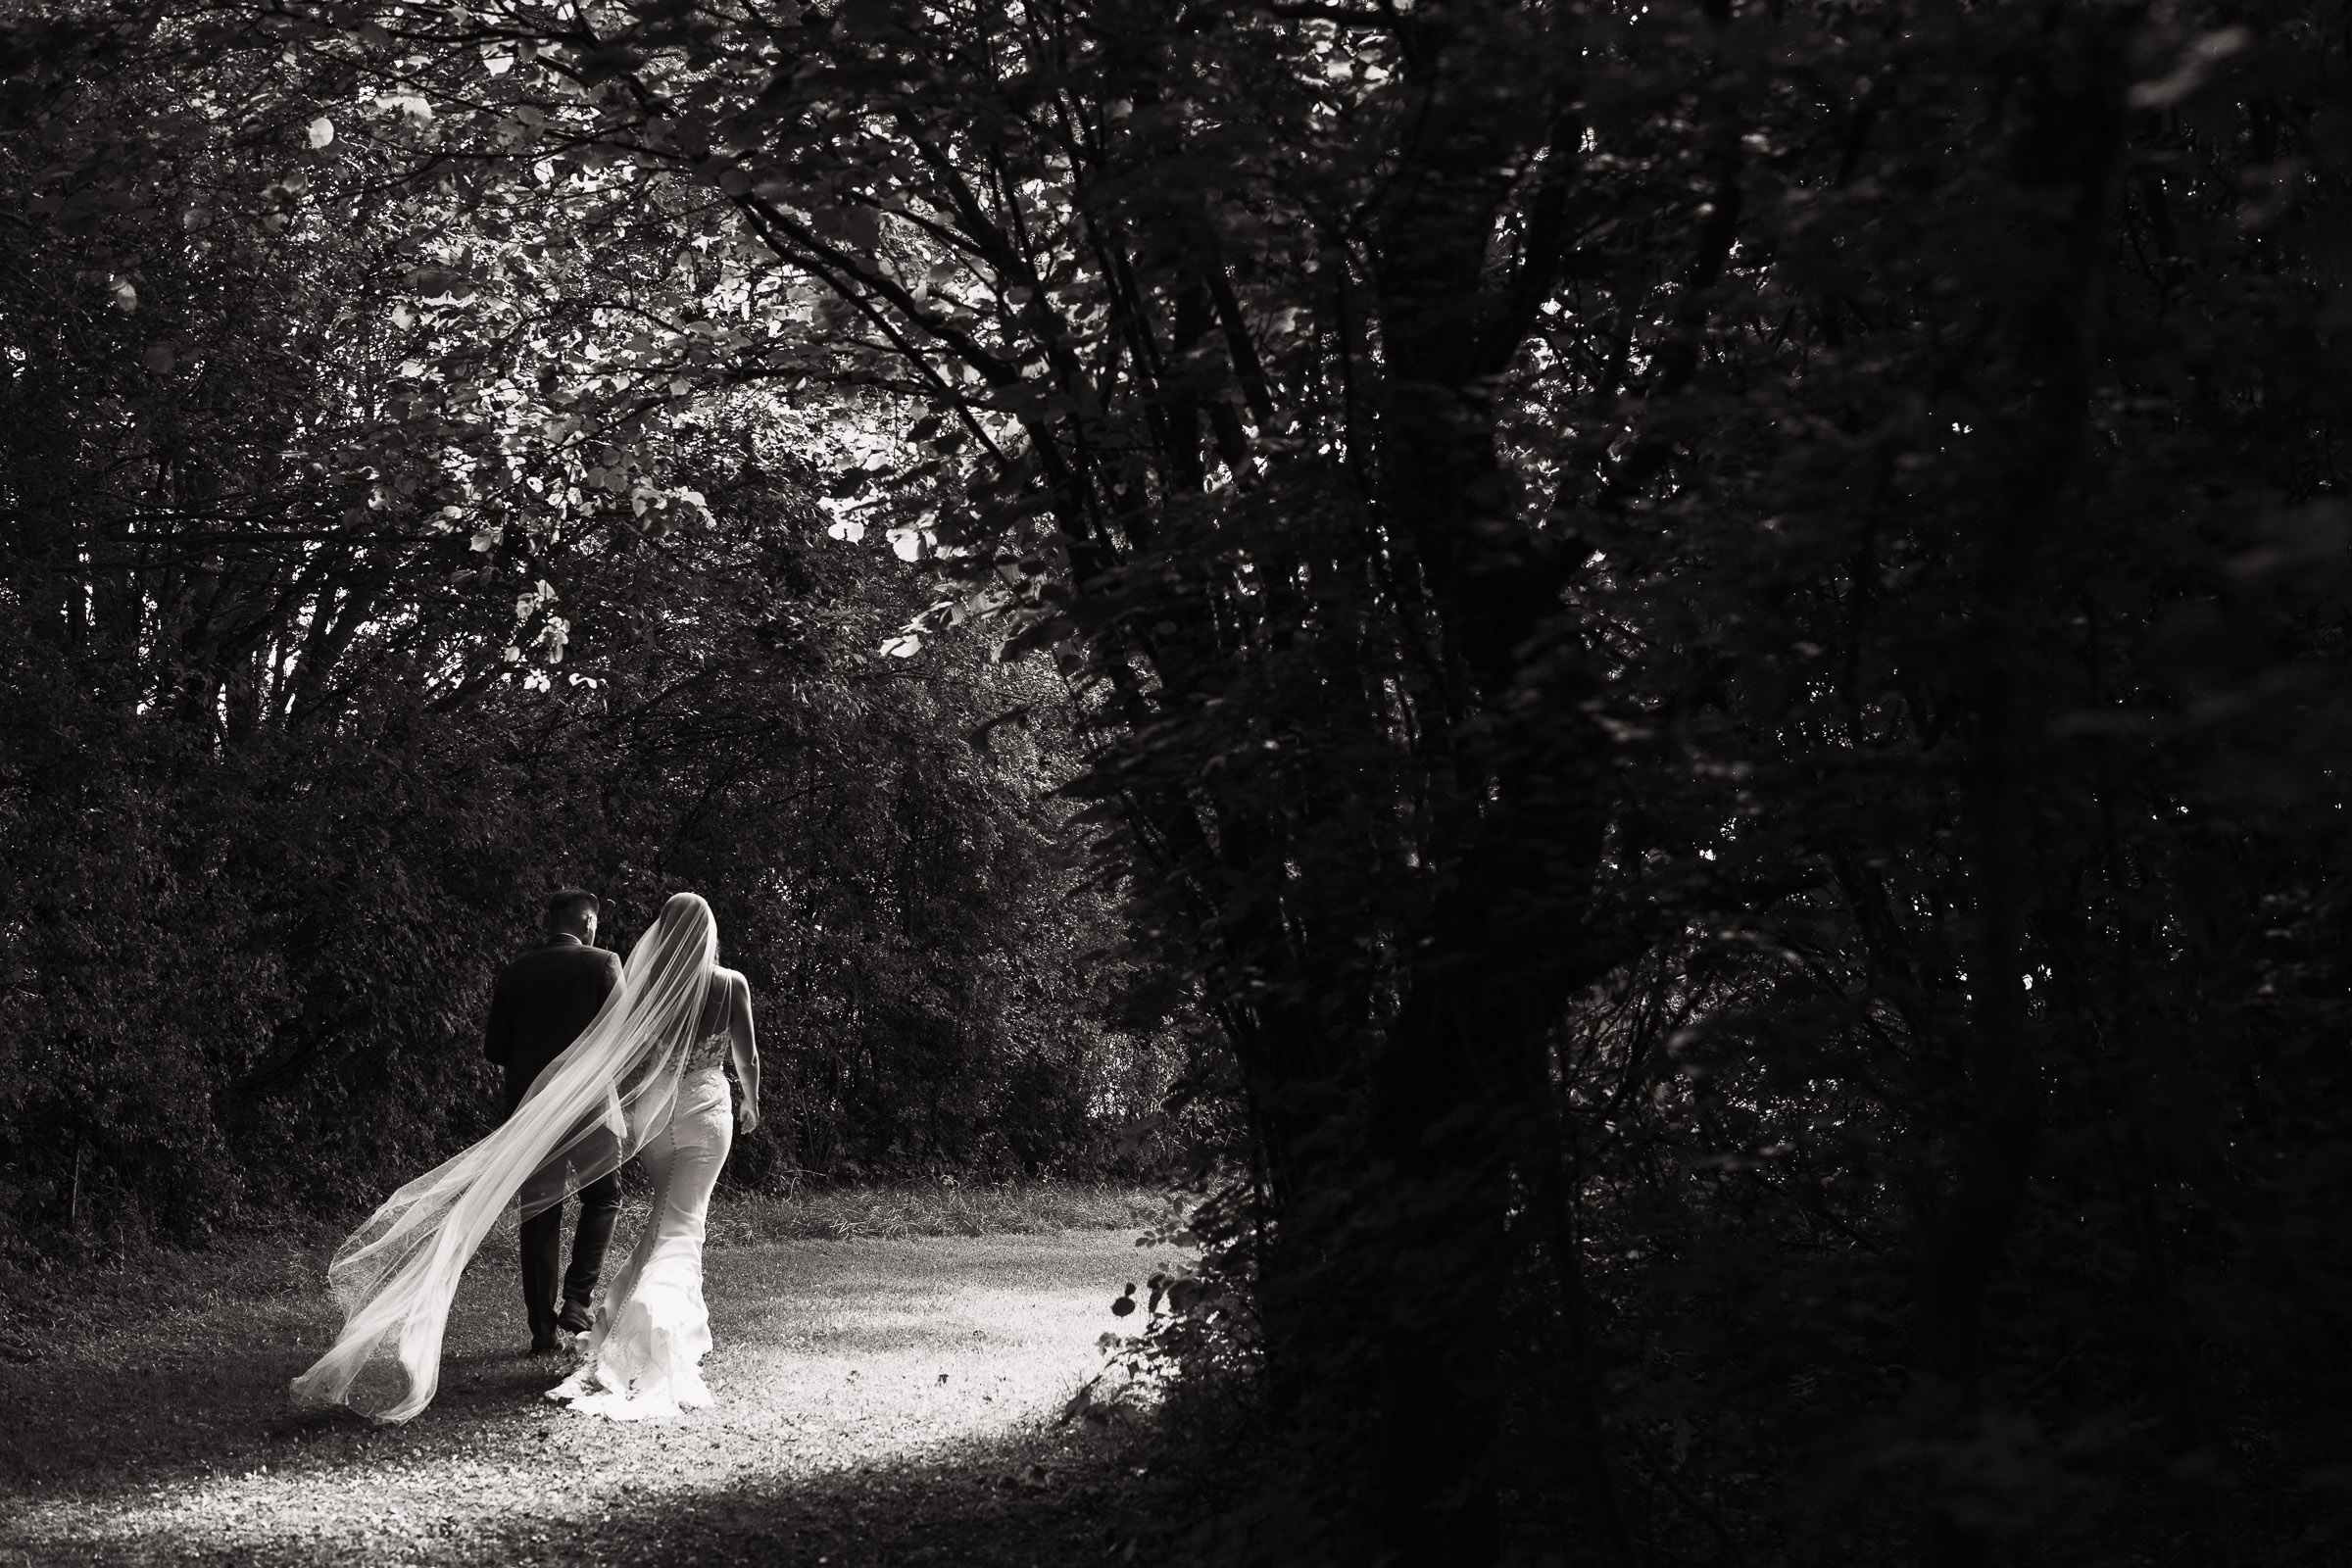 Bride and groom walking down the tree lined lane after a woodland ceremony outside at Alpheton Hall Barns. Surrounded by trees. Bride is wearing Maggie Sottero-Baxley 22MW548B01.